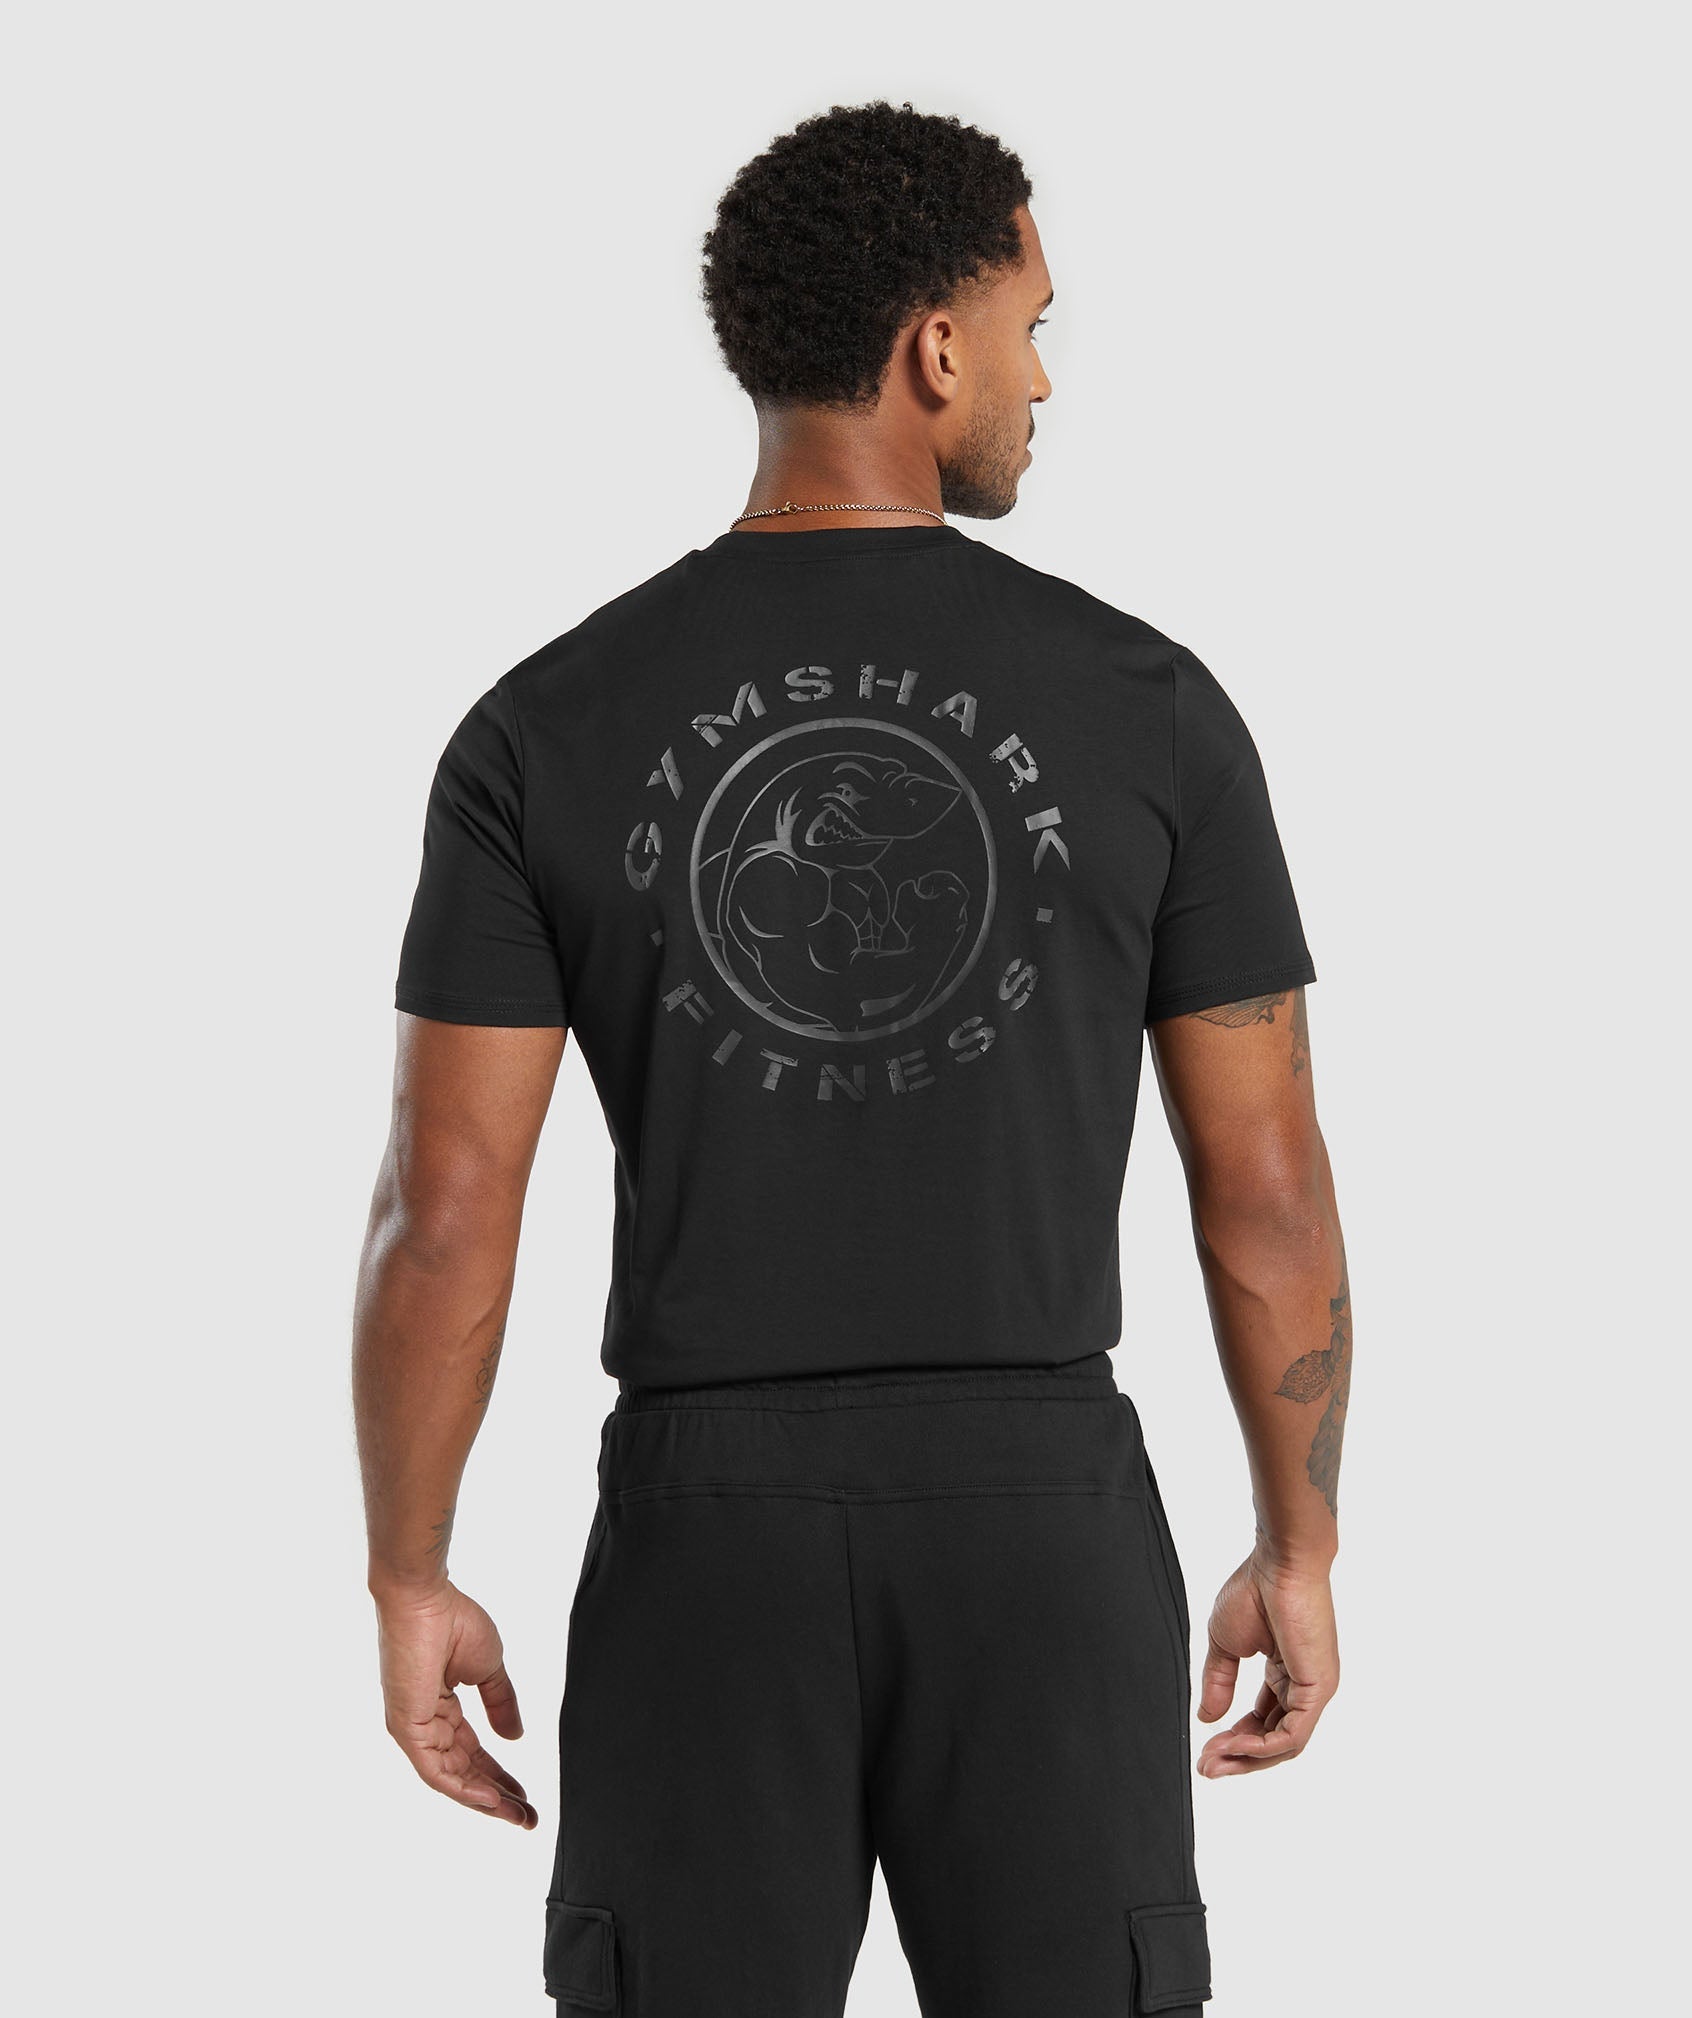 Legacy T-Shirt in Black - view 4